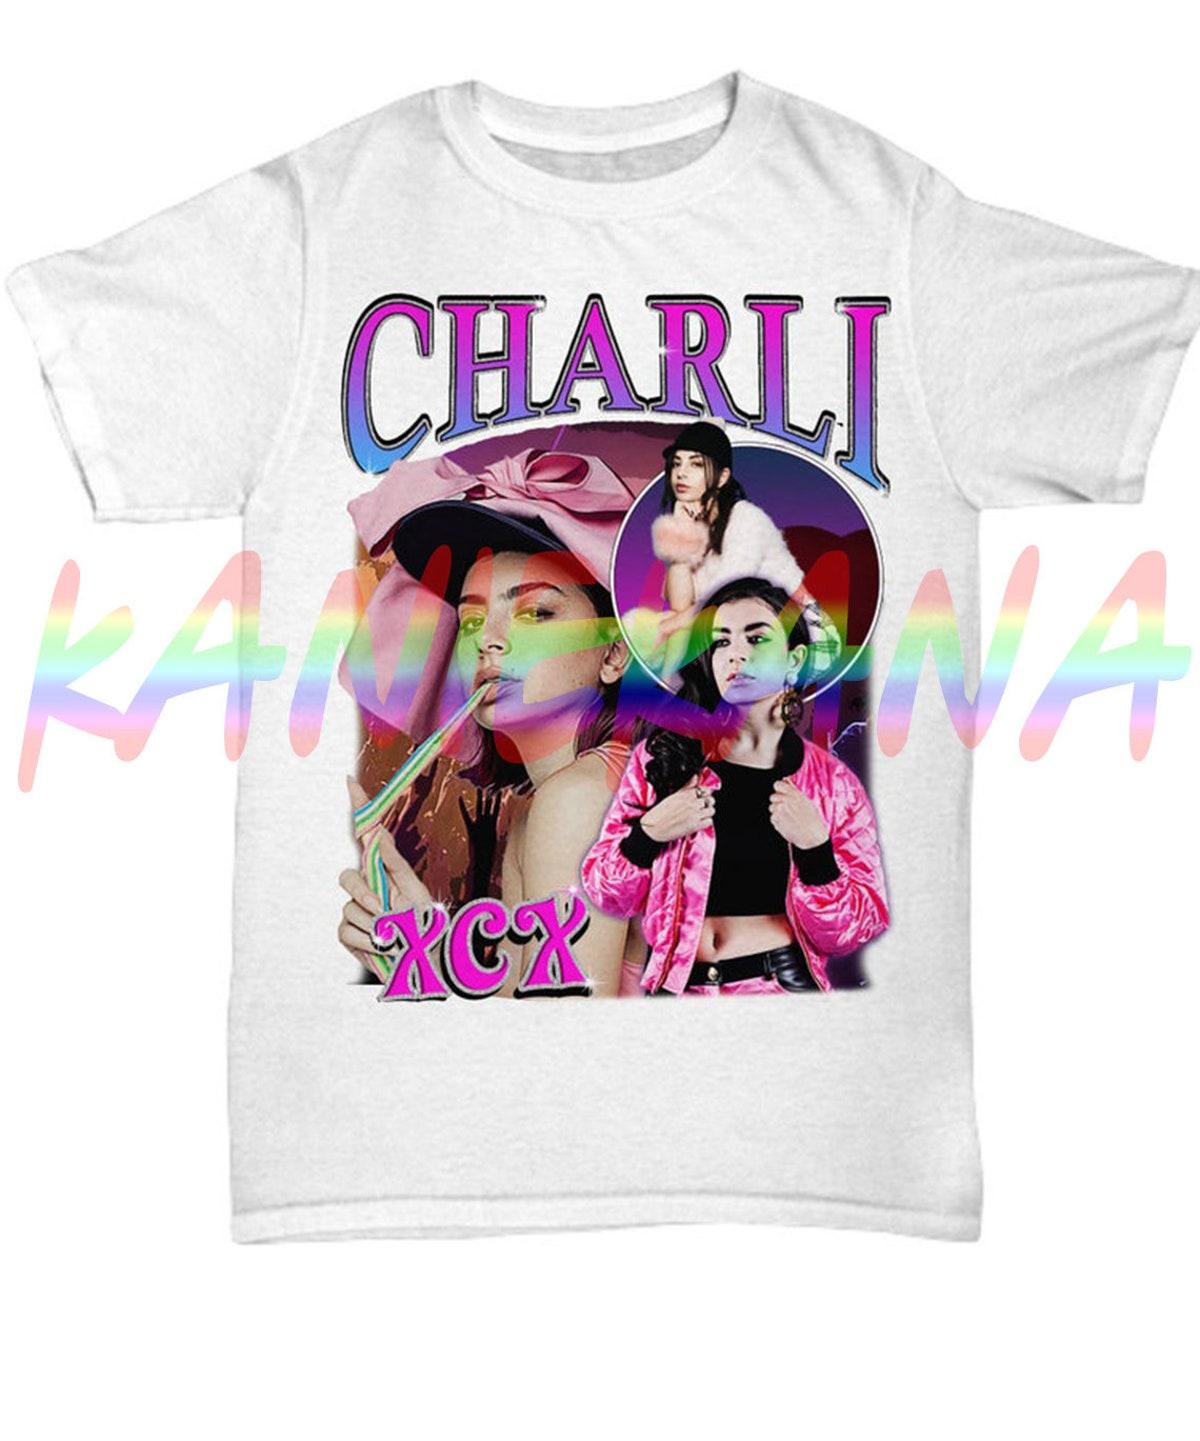 90s Retro Style Charli Xcx T-shirt Gift For Fans